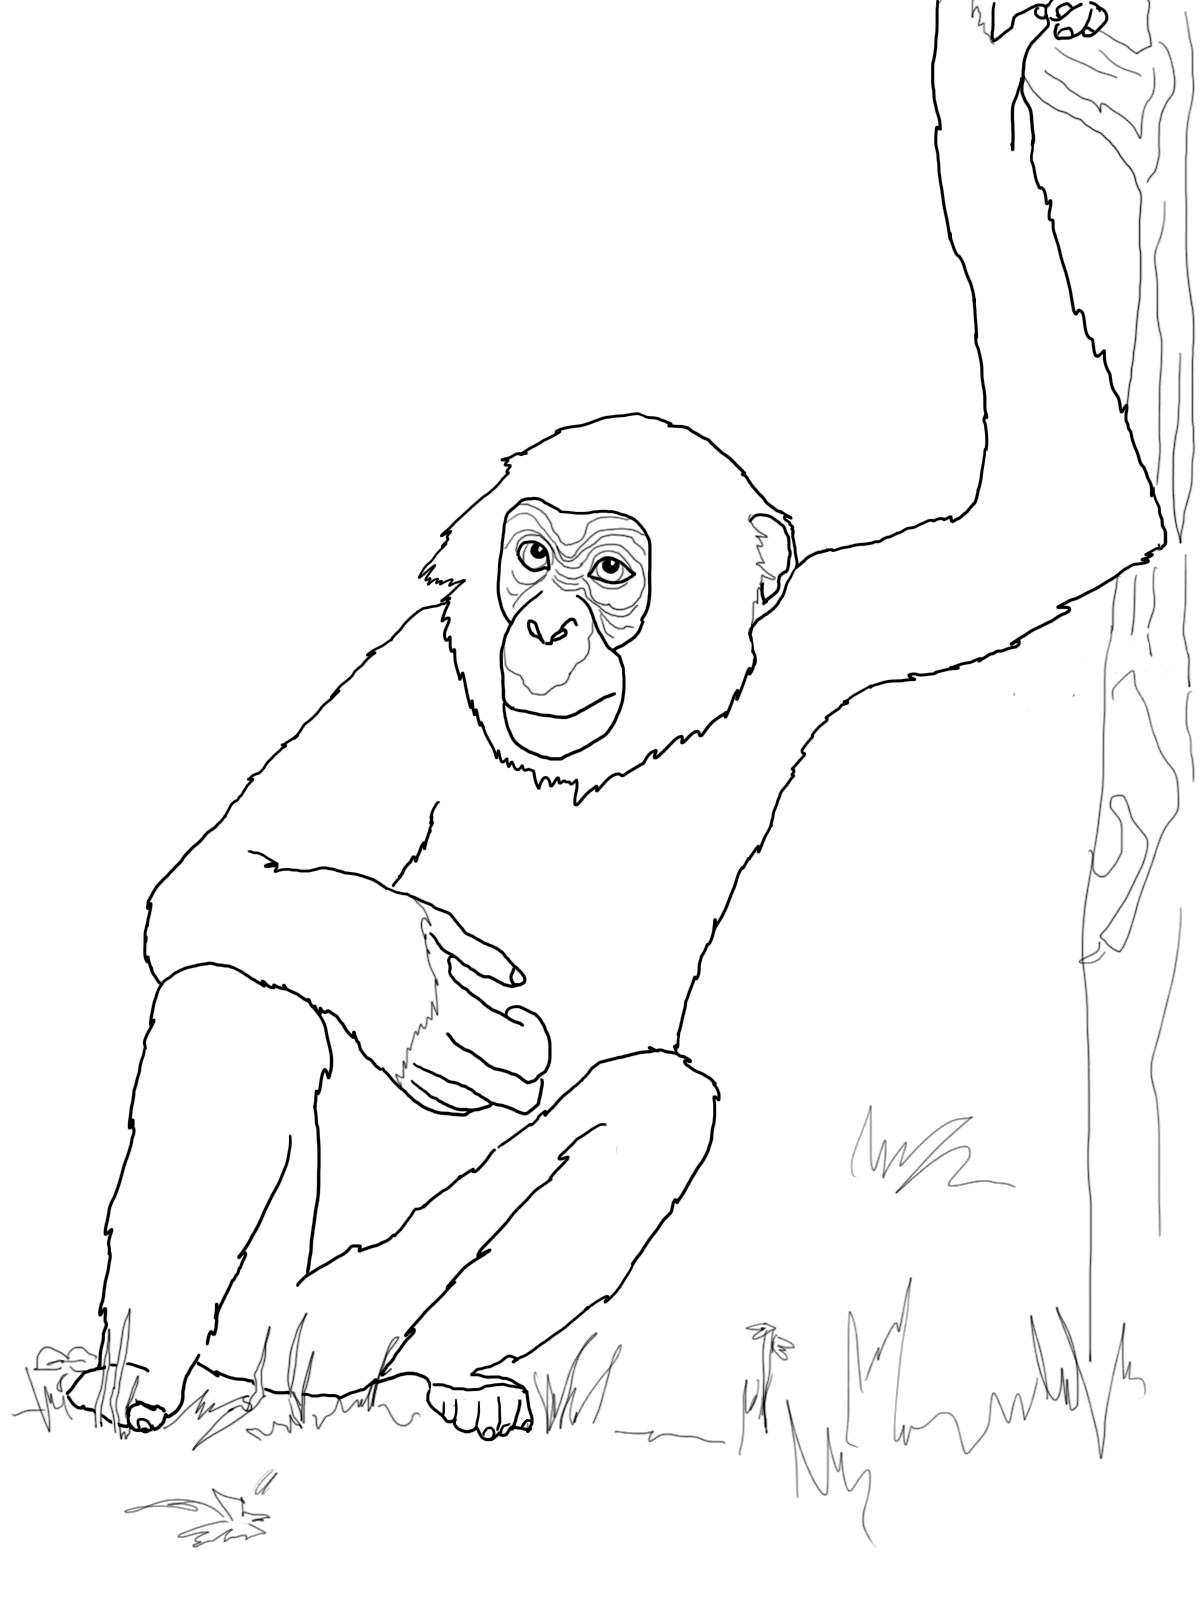 Free Printable Chimpanzee Coloring Pages For Kids